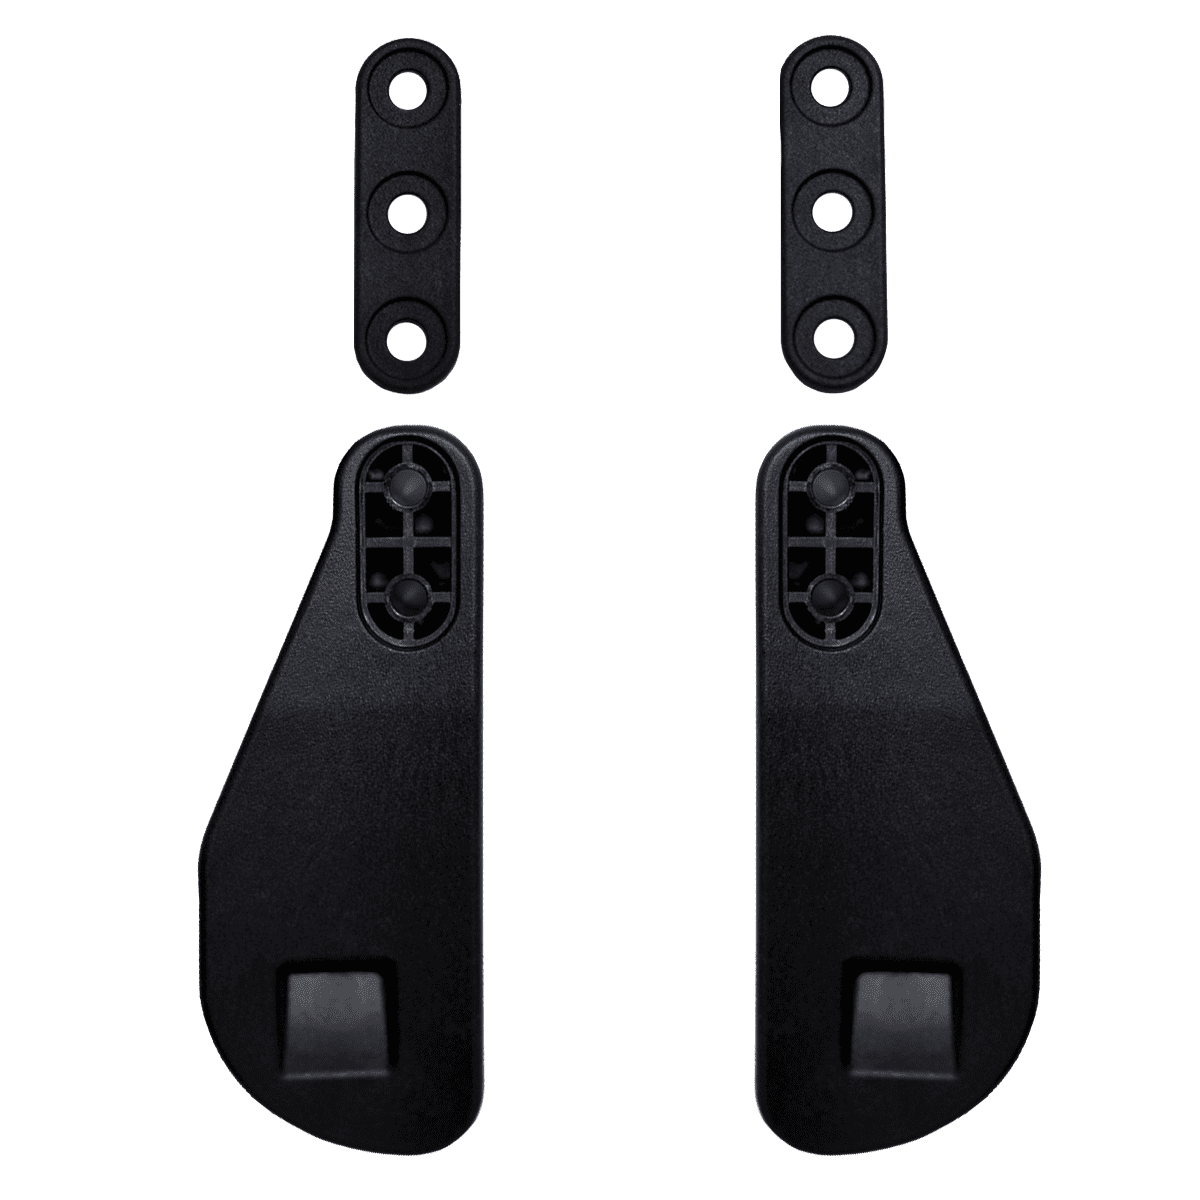 Paddle attachments